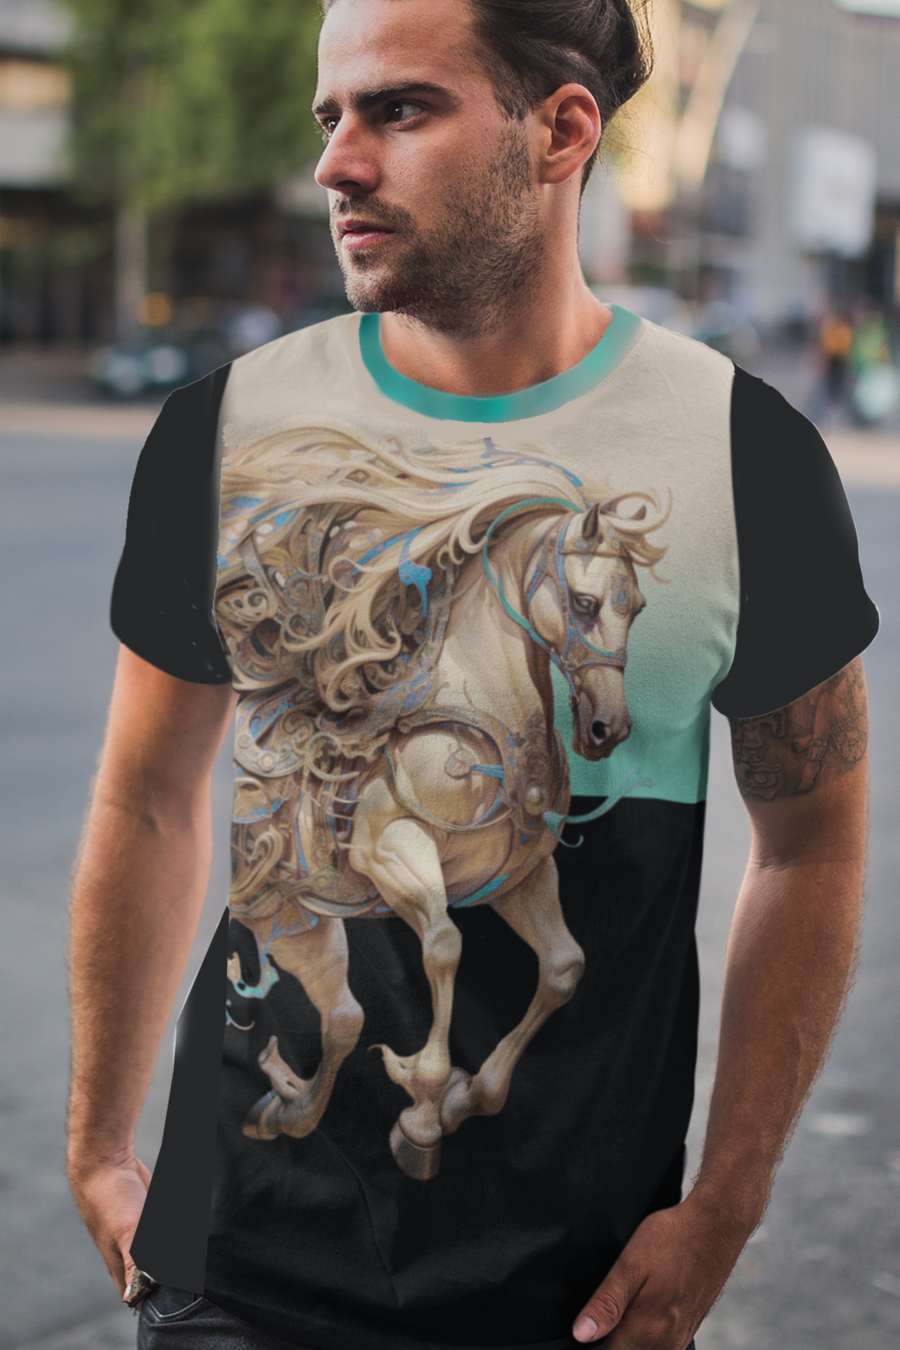 Tattooed guy wearing all over print tshirt of wild horses in chinese art style with contrasting trim